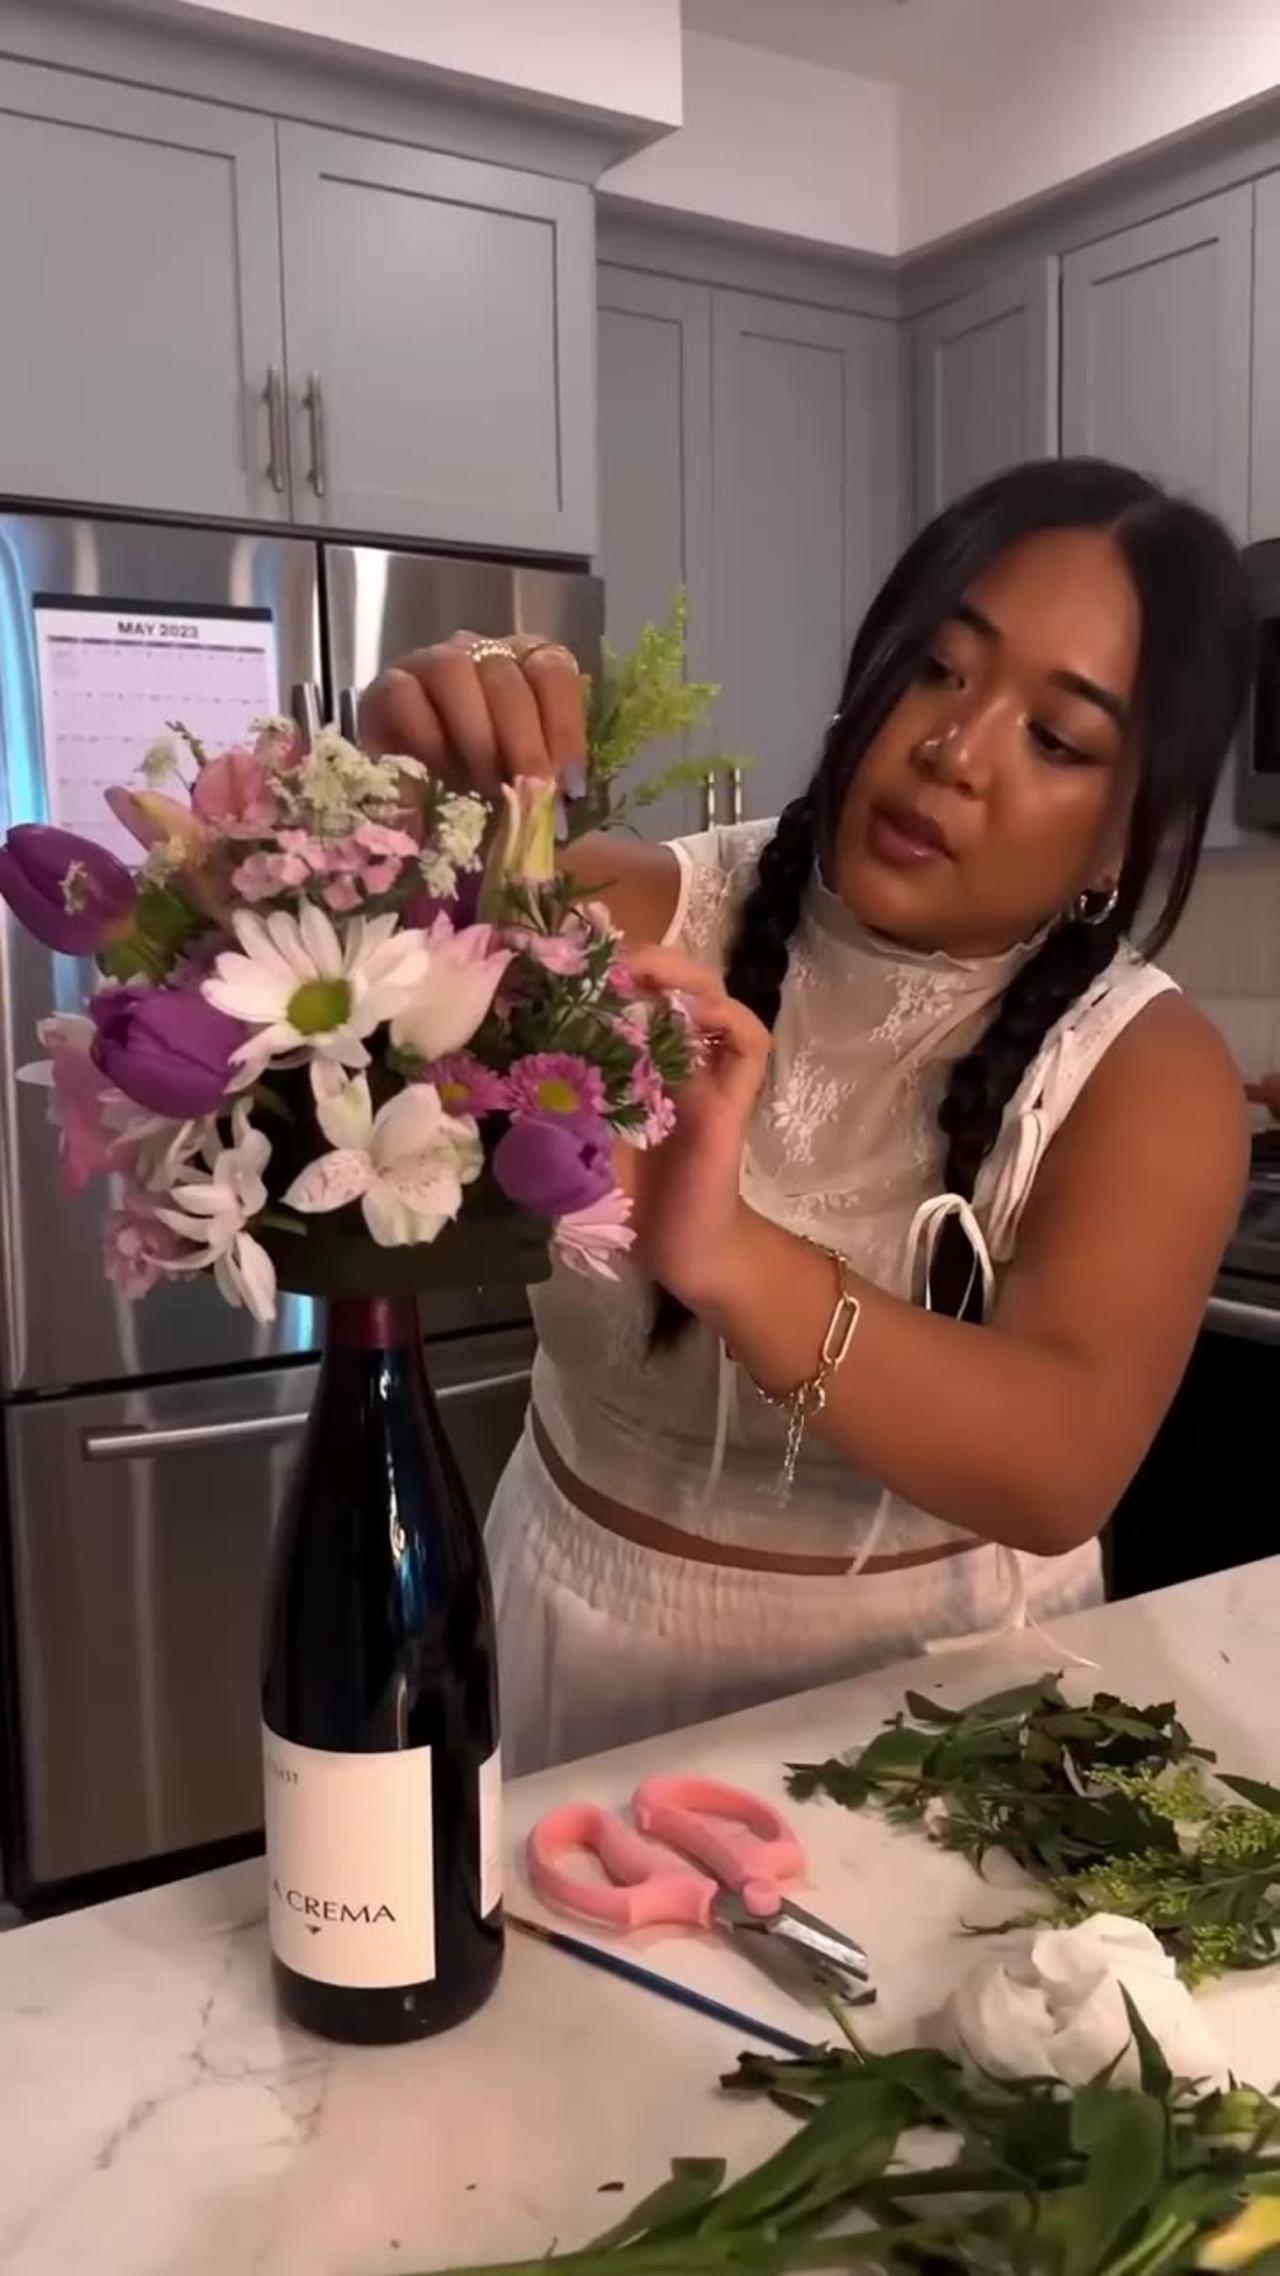 ***Mother’s Day gift idea: wine bouquet 🫶🏼***